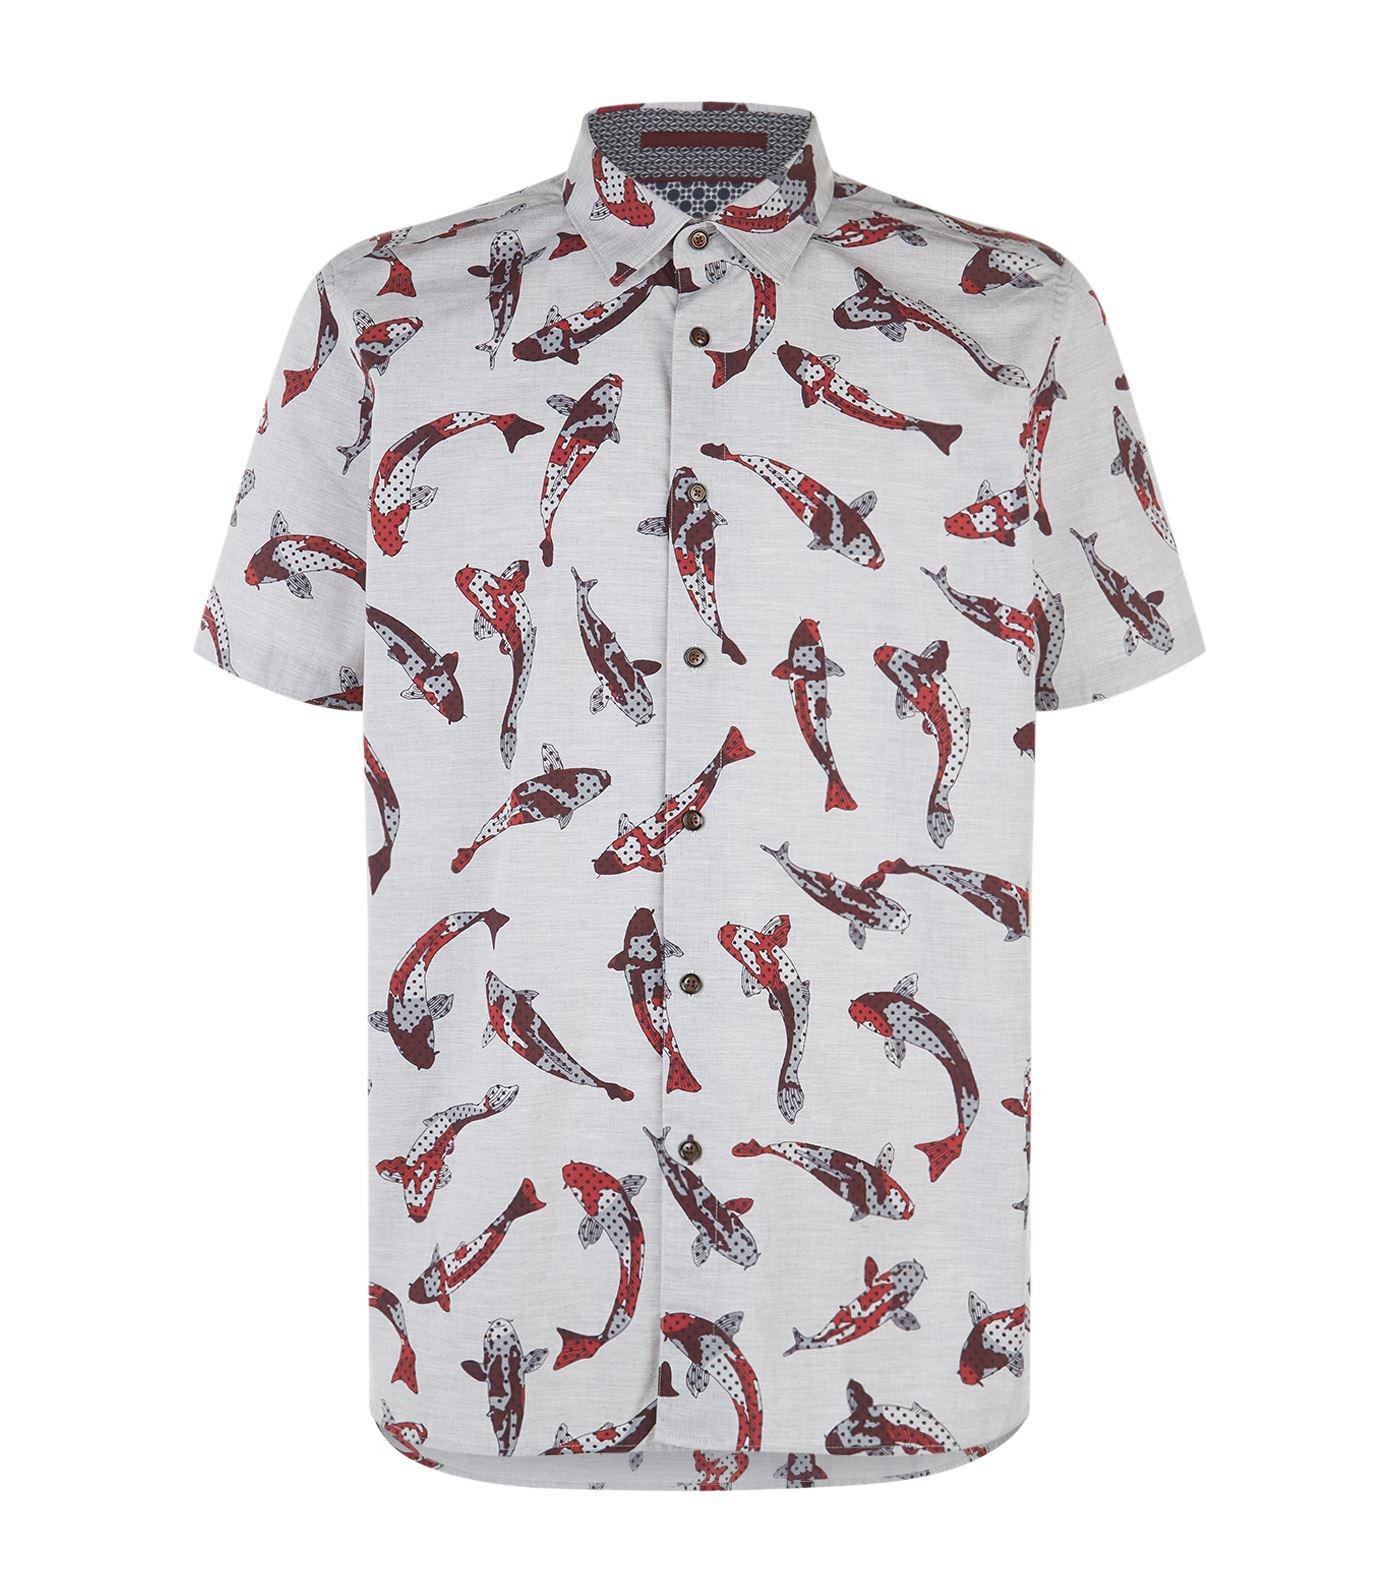 Ted Baker Cotton Fish Print Shirt in Grey (Gray) for Men - Lyst